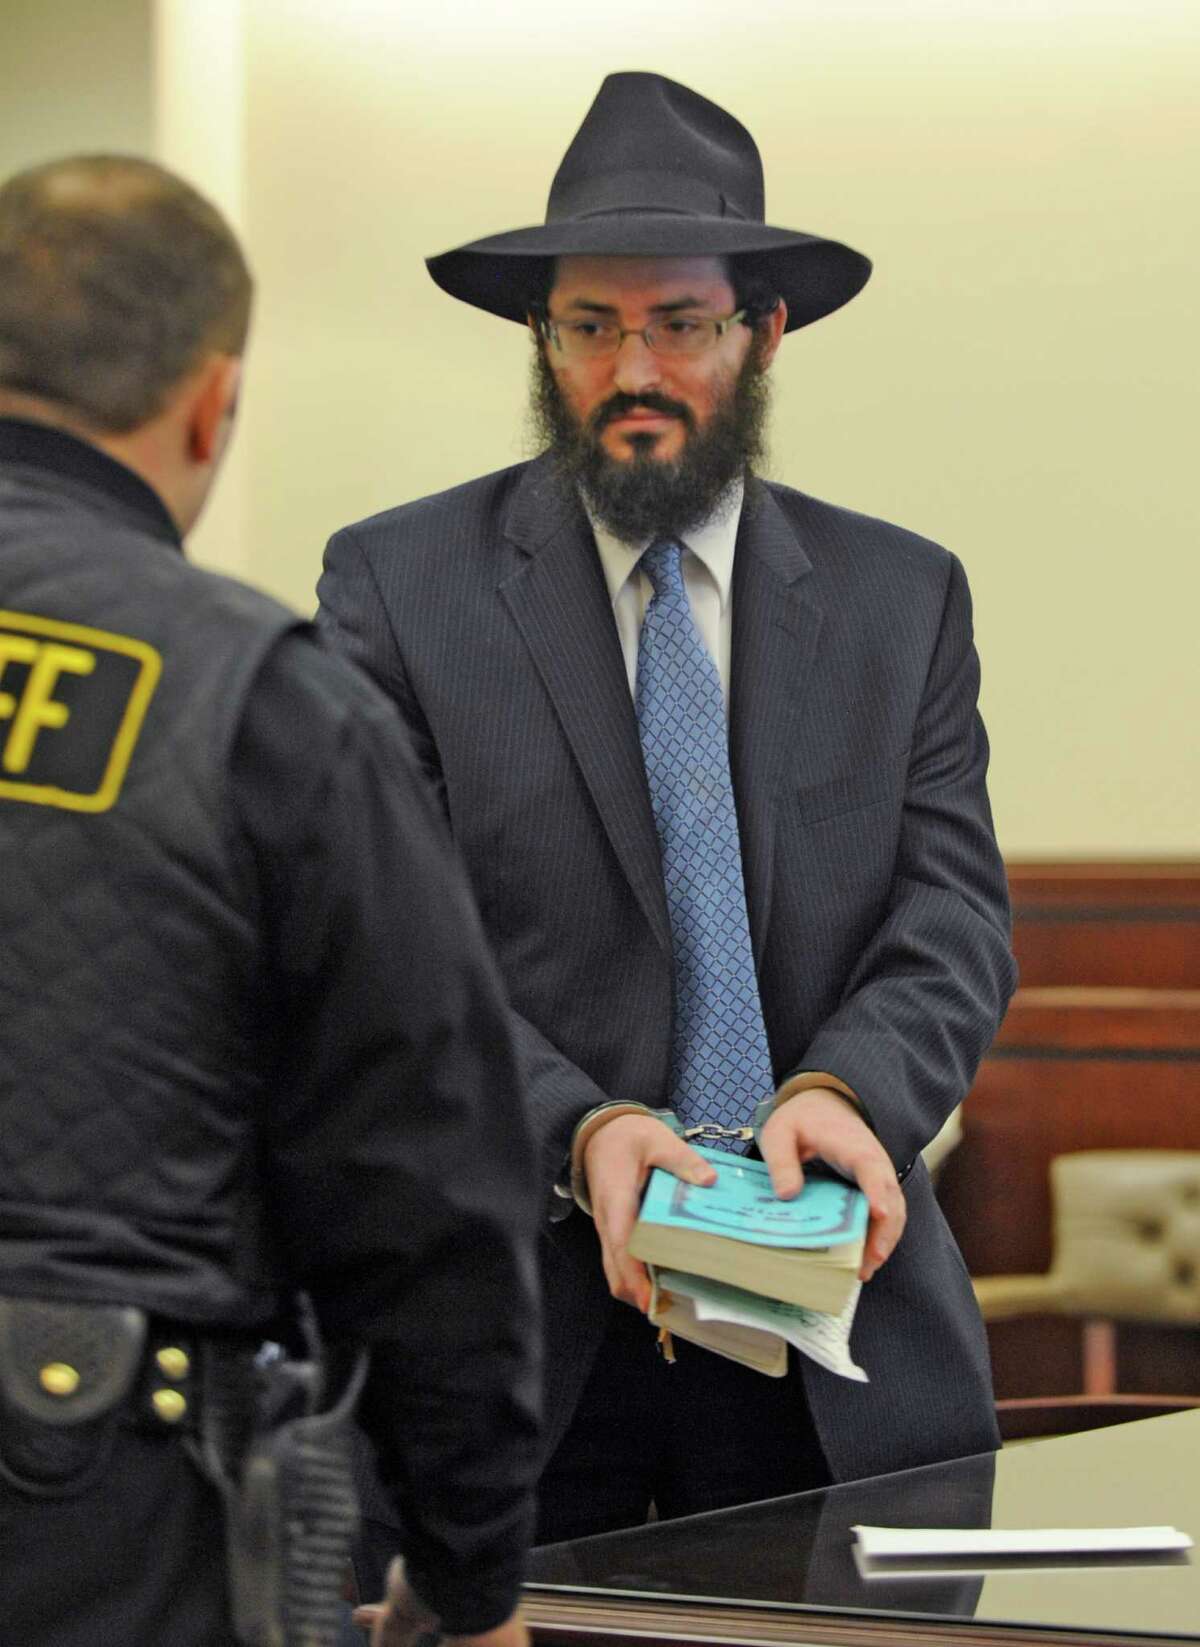 Rabbi Yaakov Weiss, formerly of Chabad of Colonie holds his prayer books and wears handcuffs after being sentenced to 60 days in Albany County Jail, his sentence for child endangerment in from Judge Stephen Herrick at the Albany County Judicial Center in Albany, New York March 8, 2010. (Skip Dickstein/Times Union)